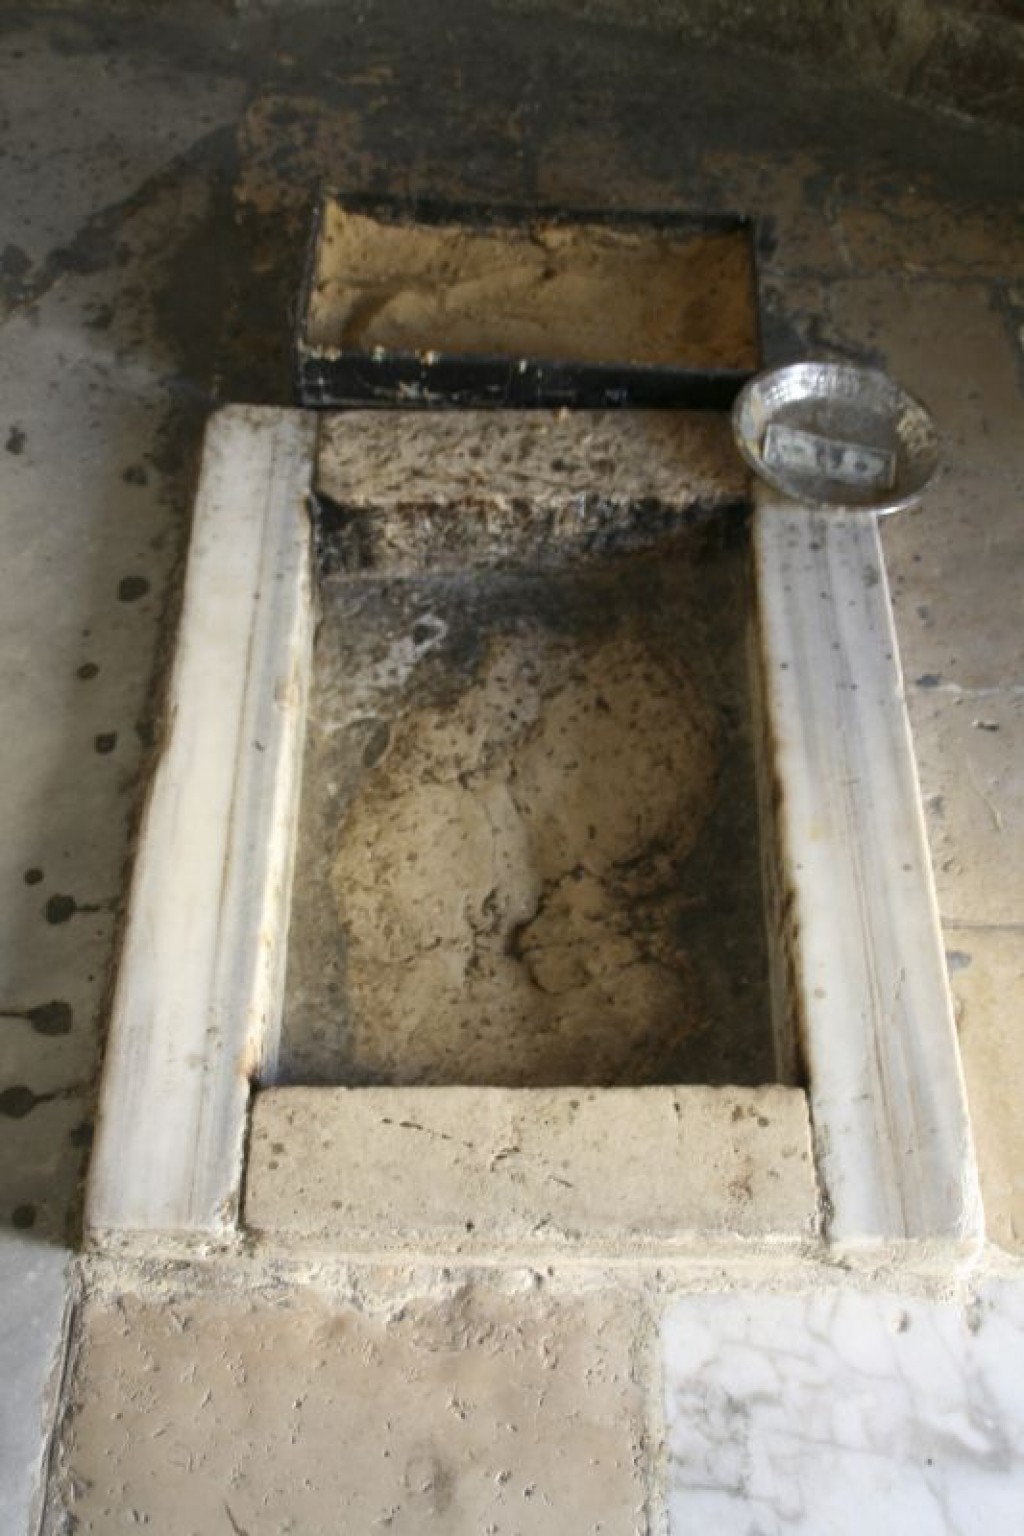 The Mosque of the Ascension, with a footprint on the floor said to be the footprint of Jesus.